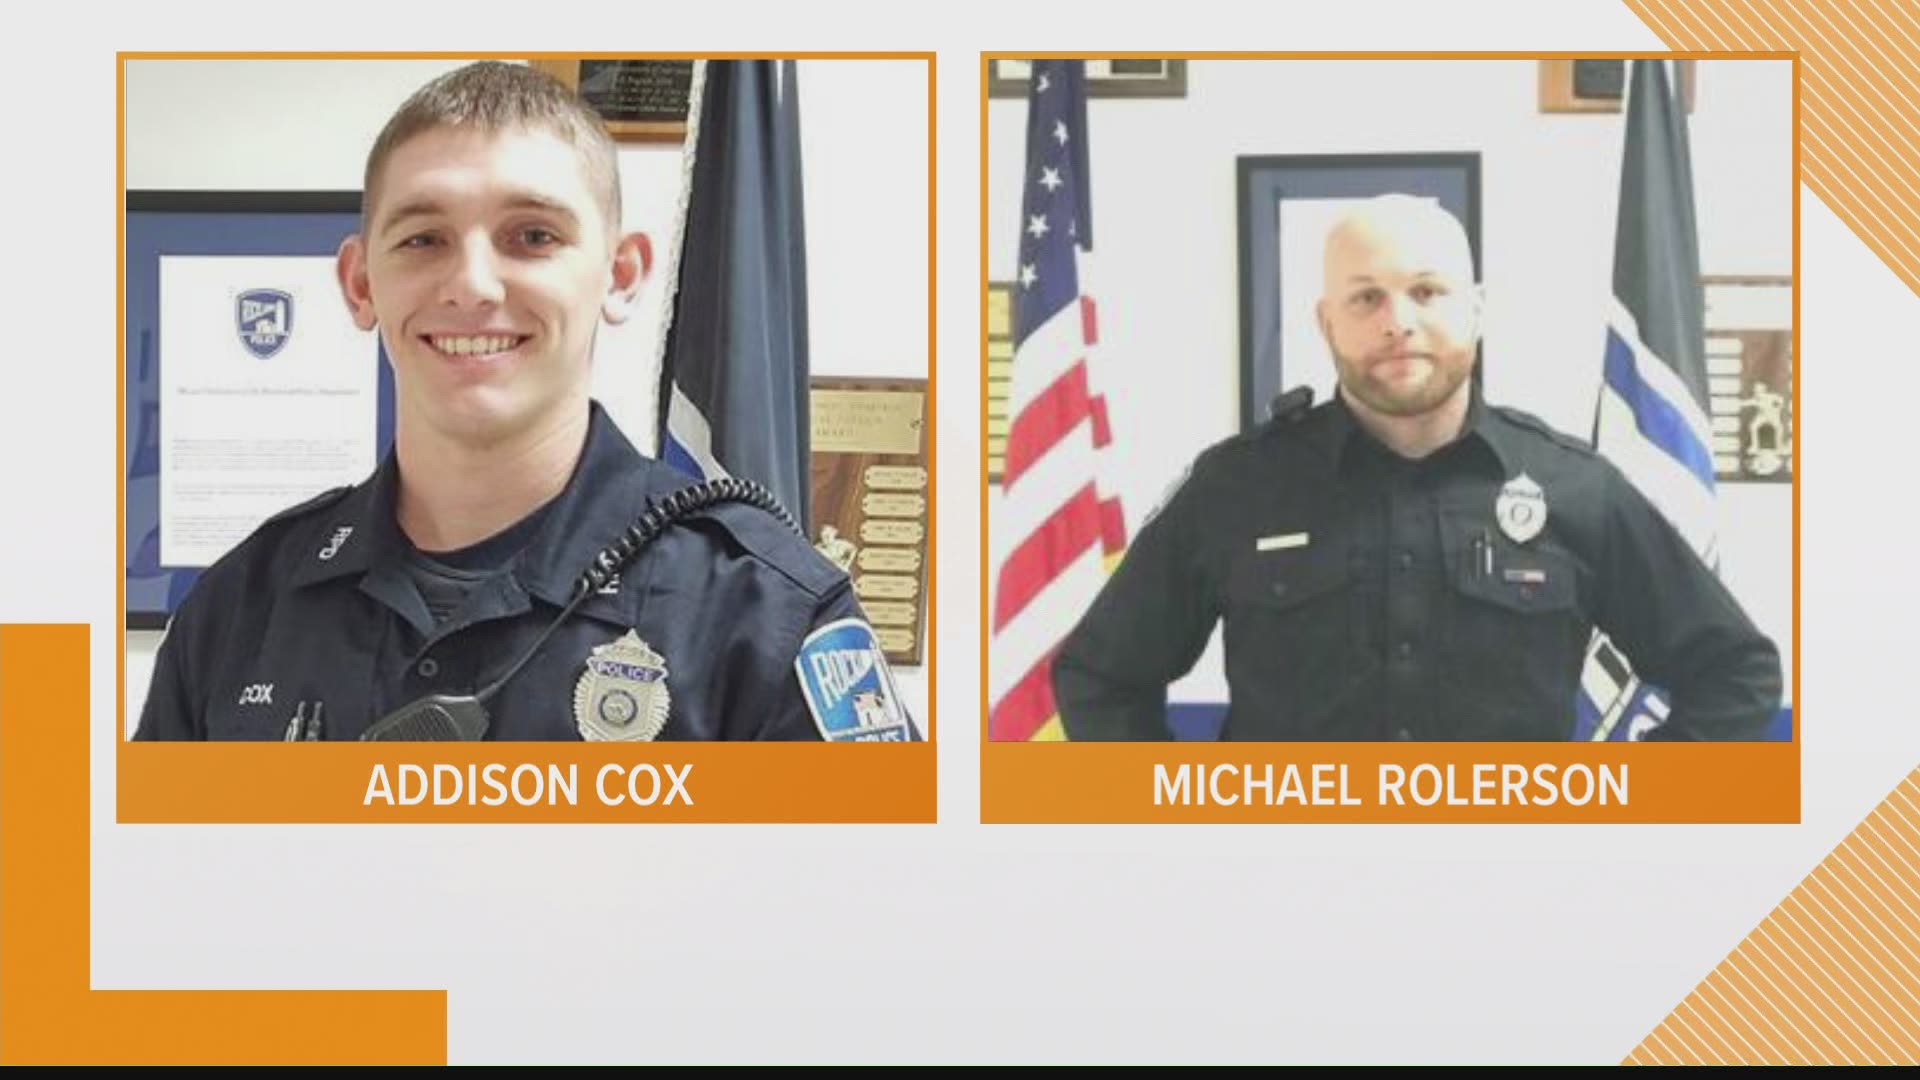 Officials say Addison Cox and Michael Rolerson were charged with aggravated animal cruelty and night hunting after allegedly beating porcupines to death.